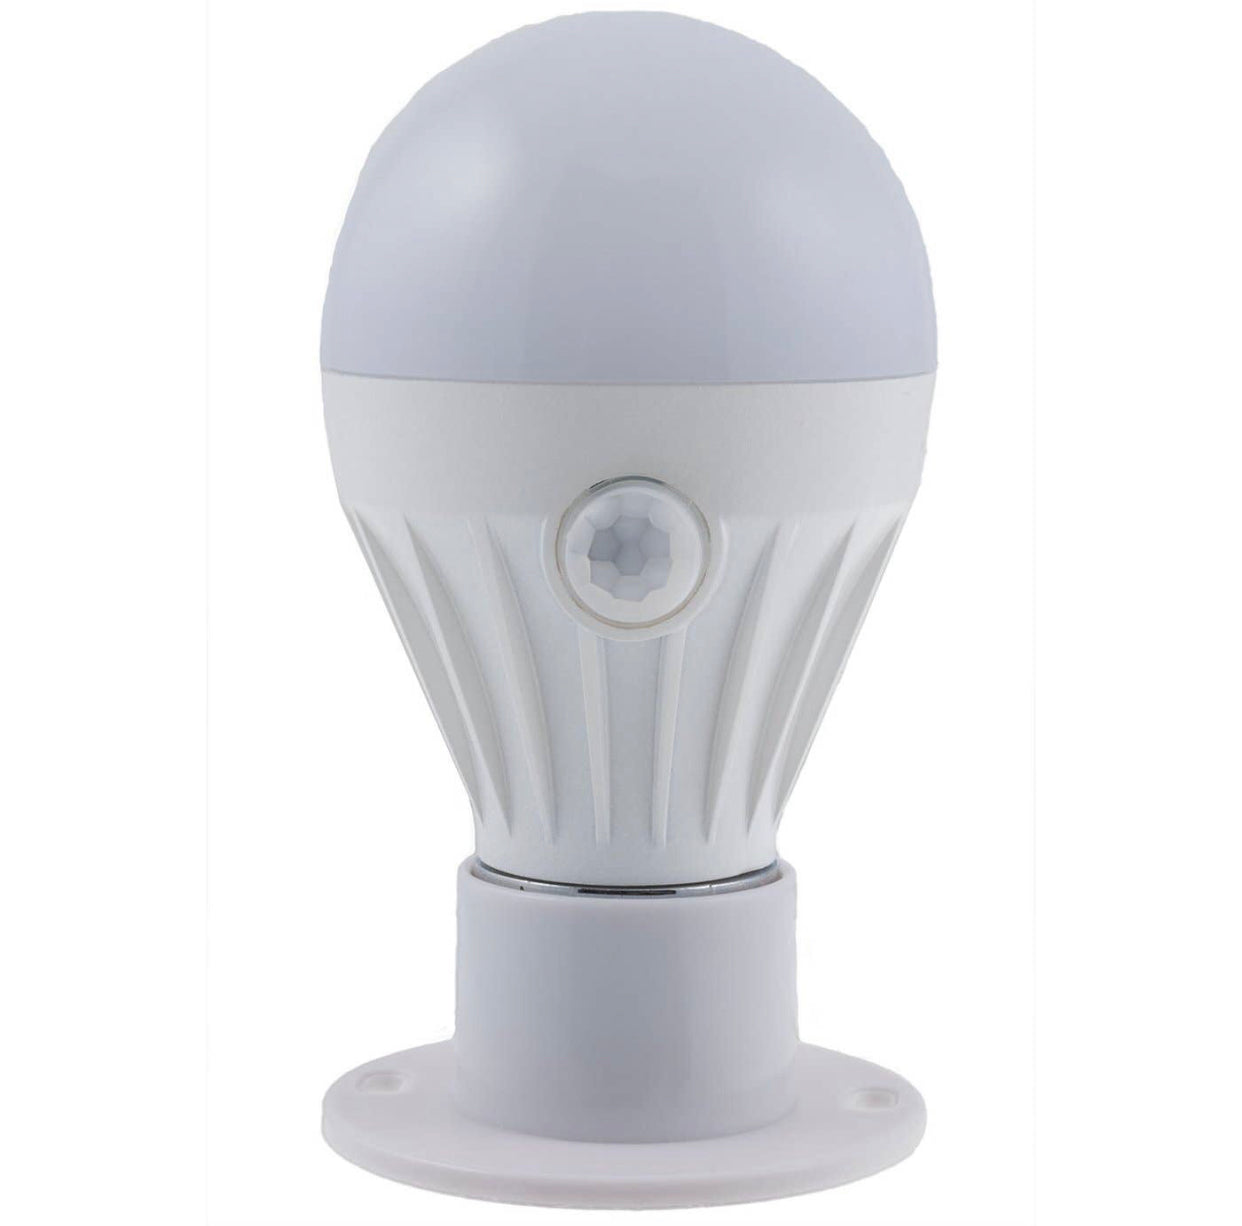 Motion Activated Portable Bulb